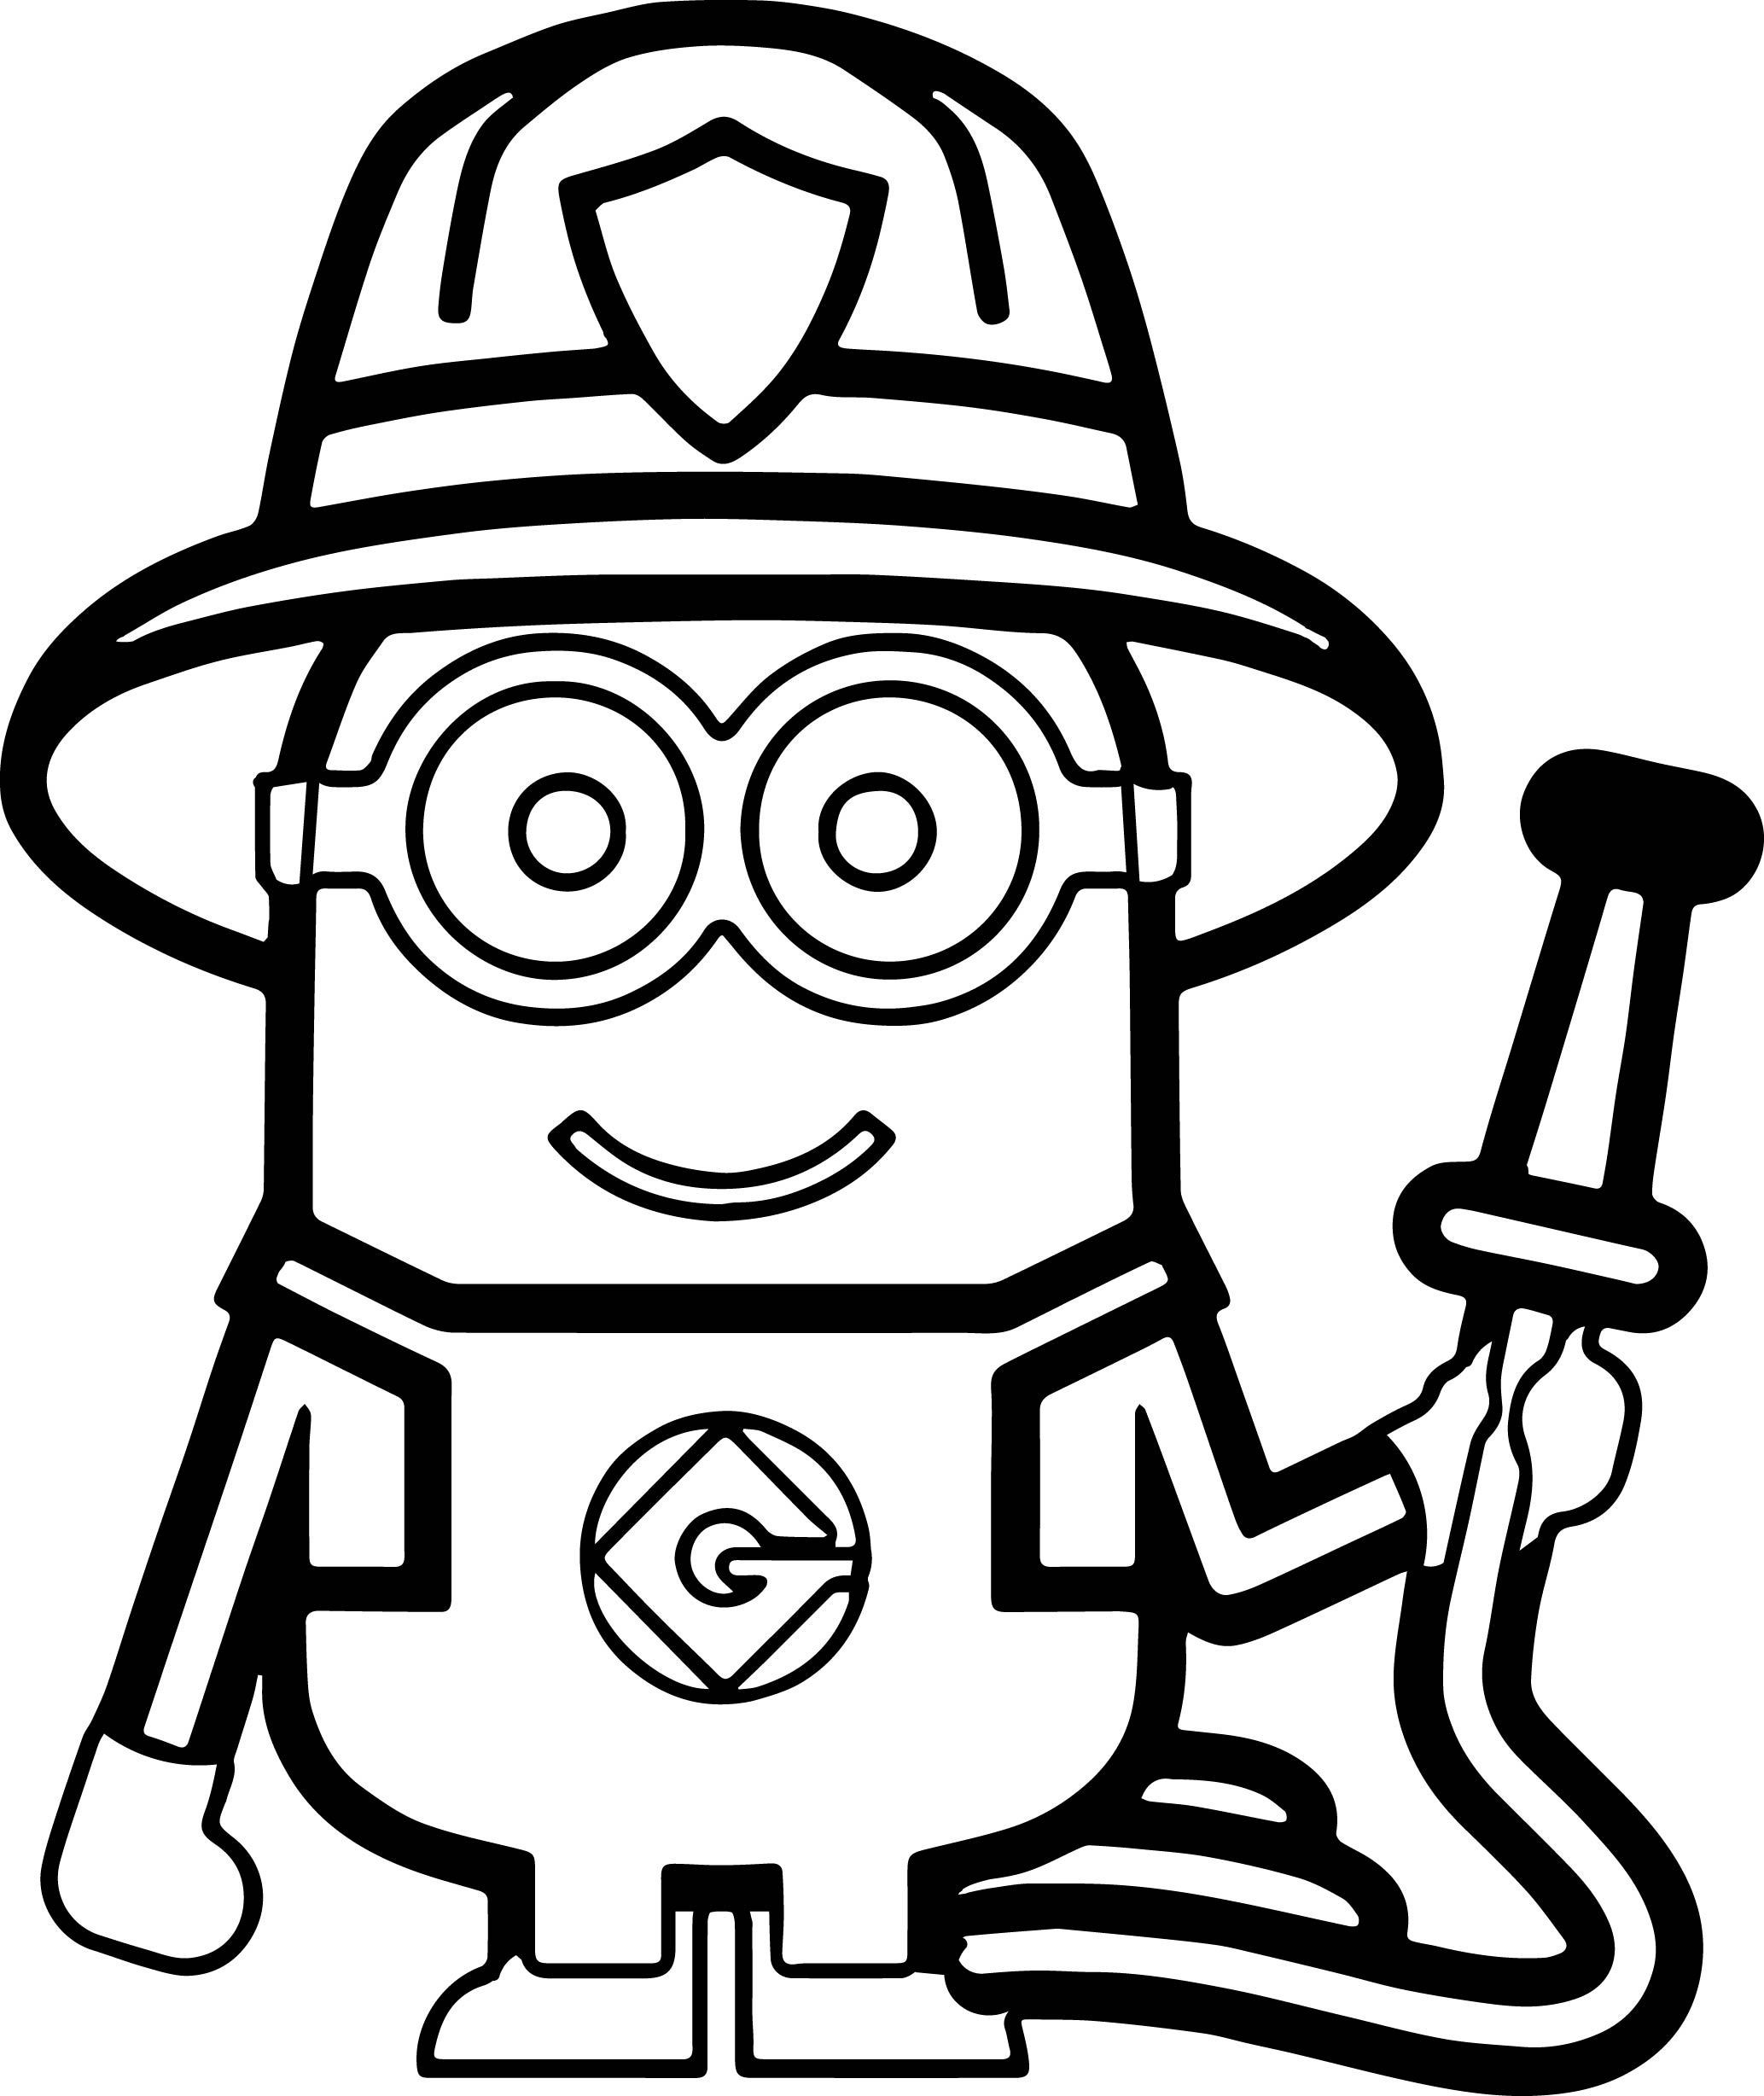 Firefighter Helmet Coloring Page at Free printable